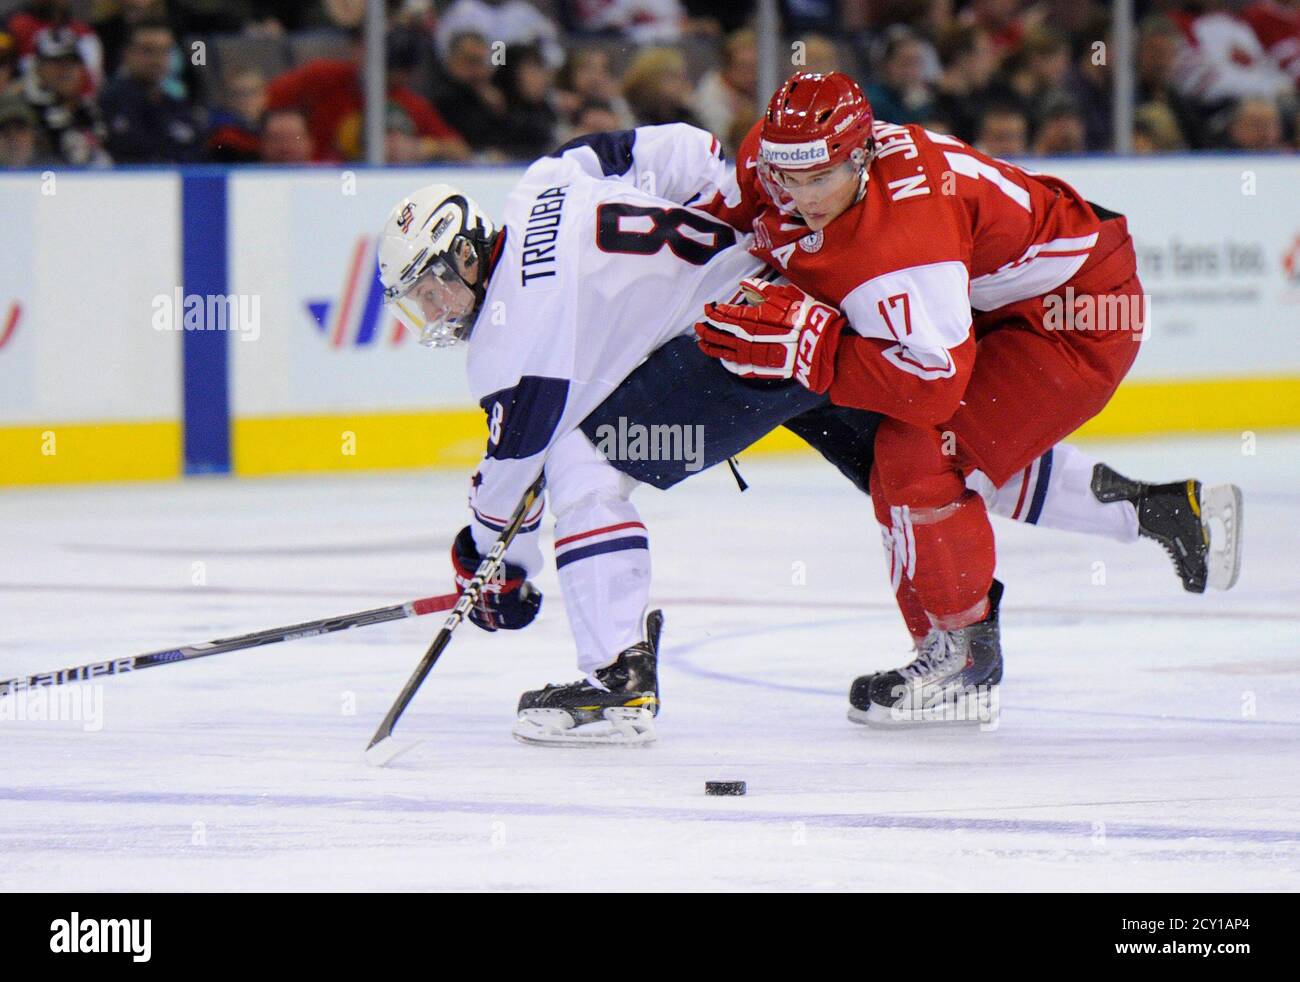 Team USA's Jacob Trouba and Denmark's Nicklas Jensen battle for the puck  during the first period of play at the 2012 IIHF U20 World Junior Hockey  Championship in Edmonton, Alberta, December 26,